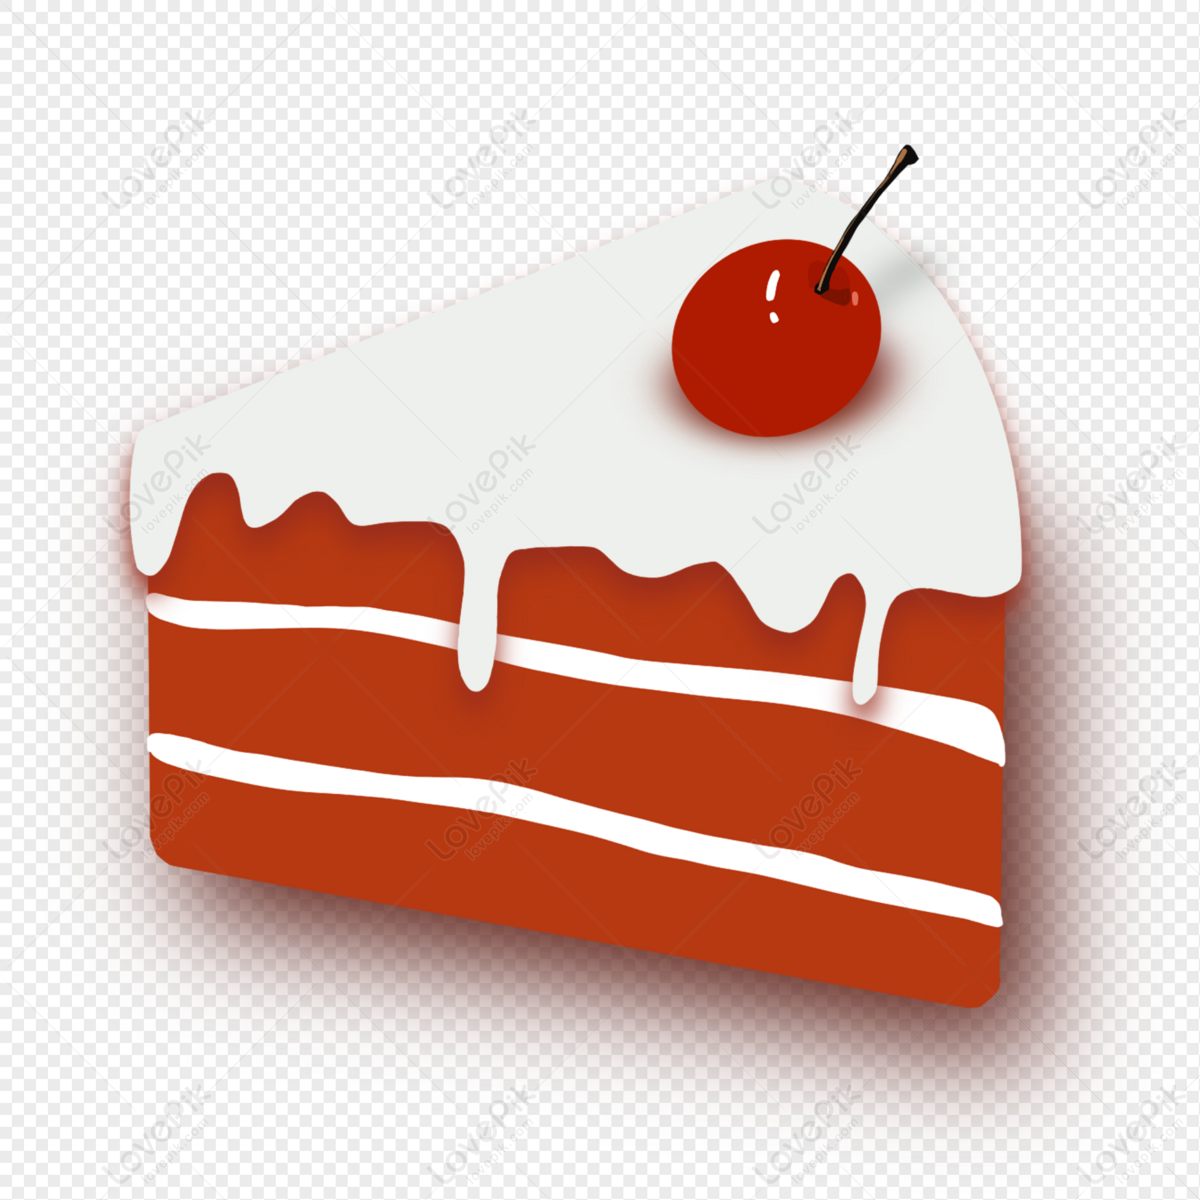 Chocolate cake with cherry Royalty Free Vector Image